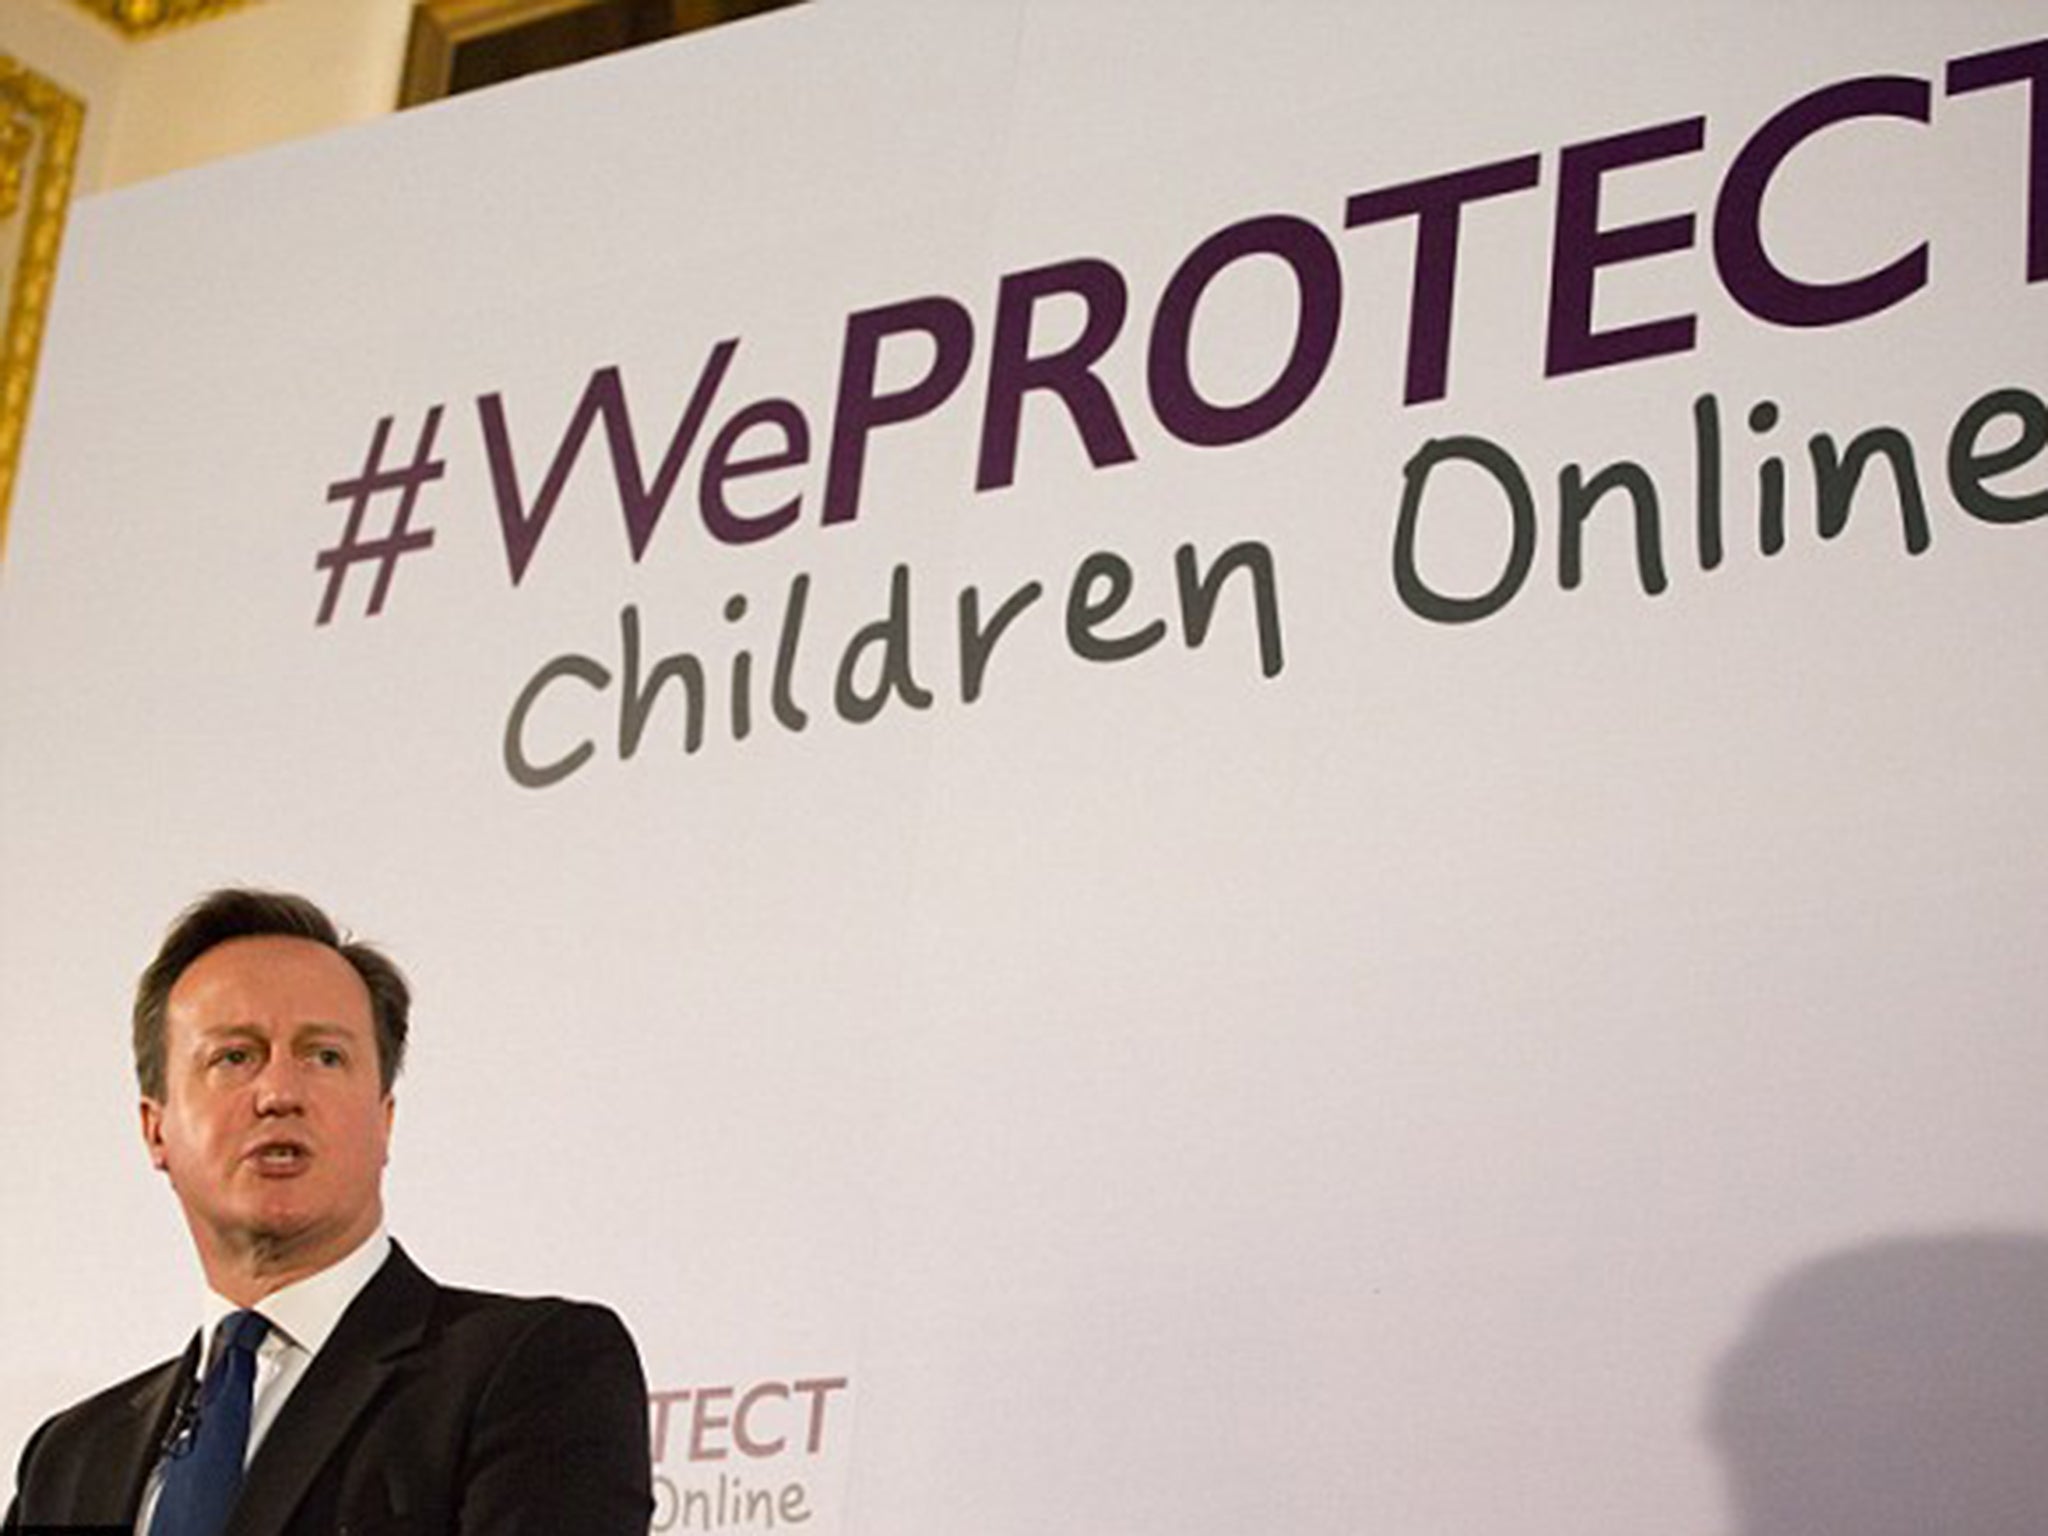 David Cameron at the December 2014 summit with internet firms at which he promised to create the new criminal offence